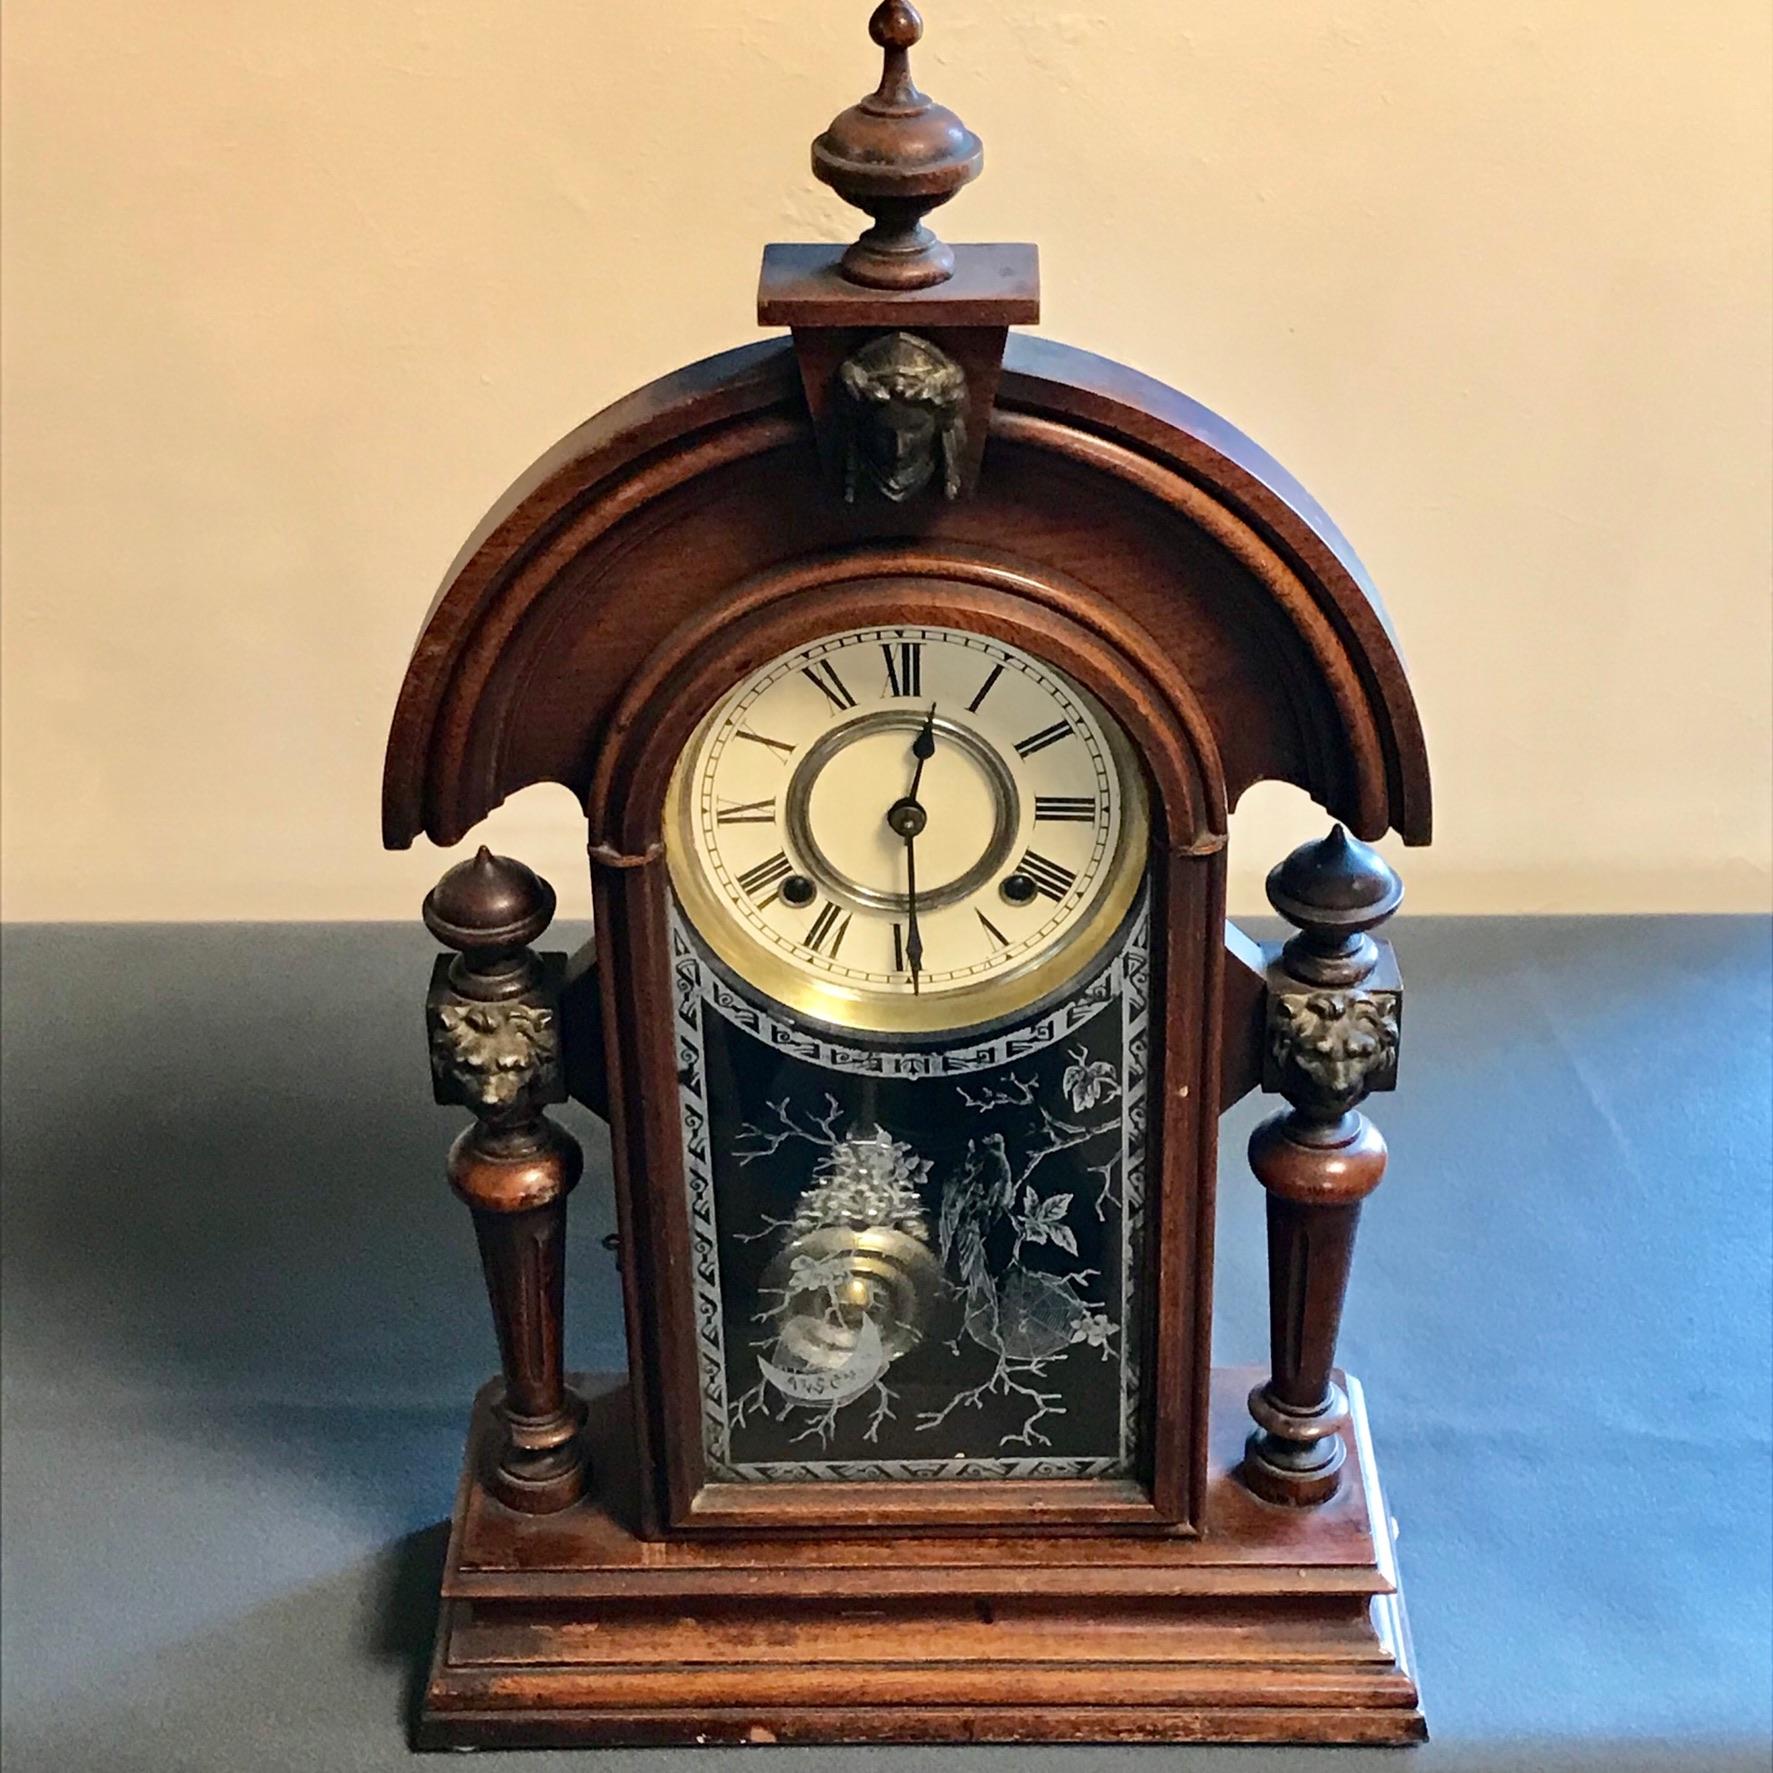 Antique Ansonia Mantel Clock When Did The Ansonia 30 Hour Alarm Come Out